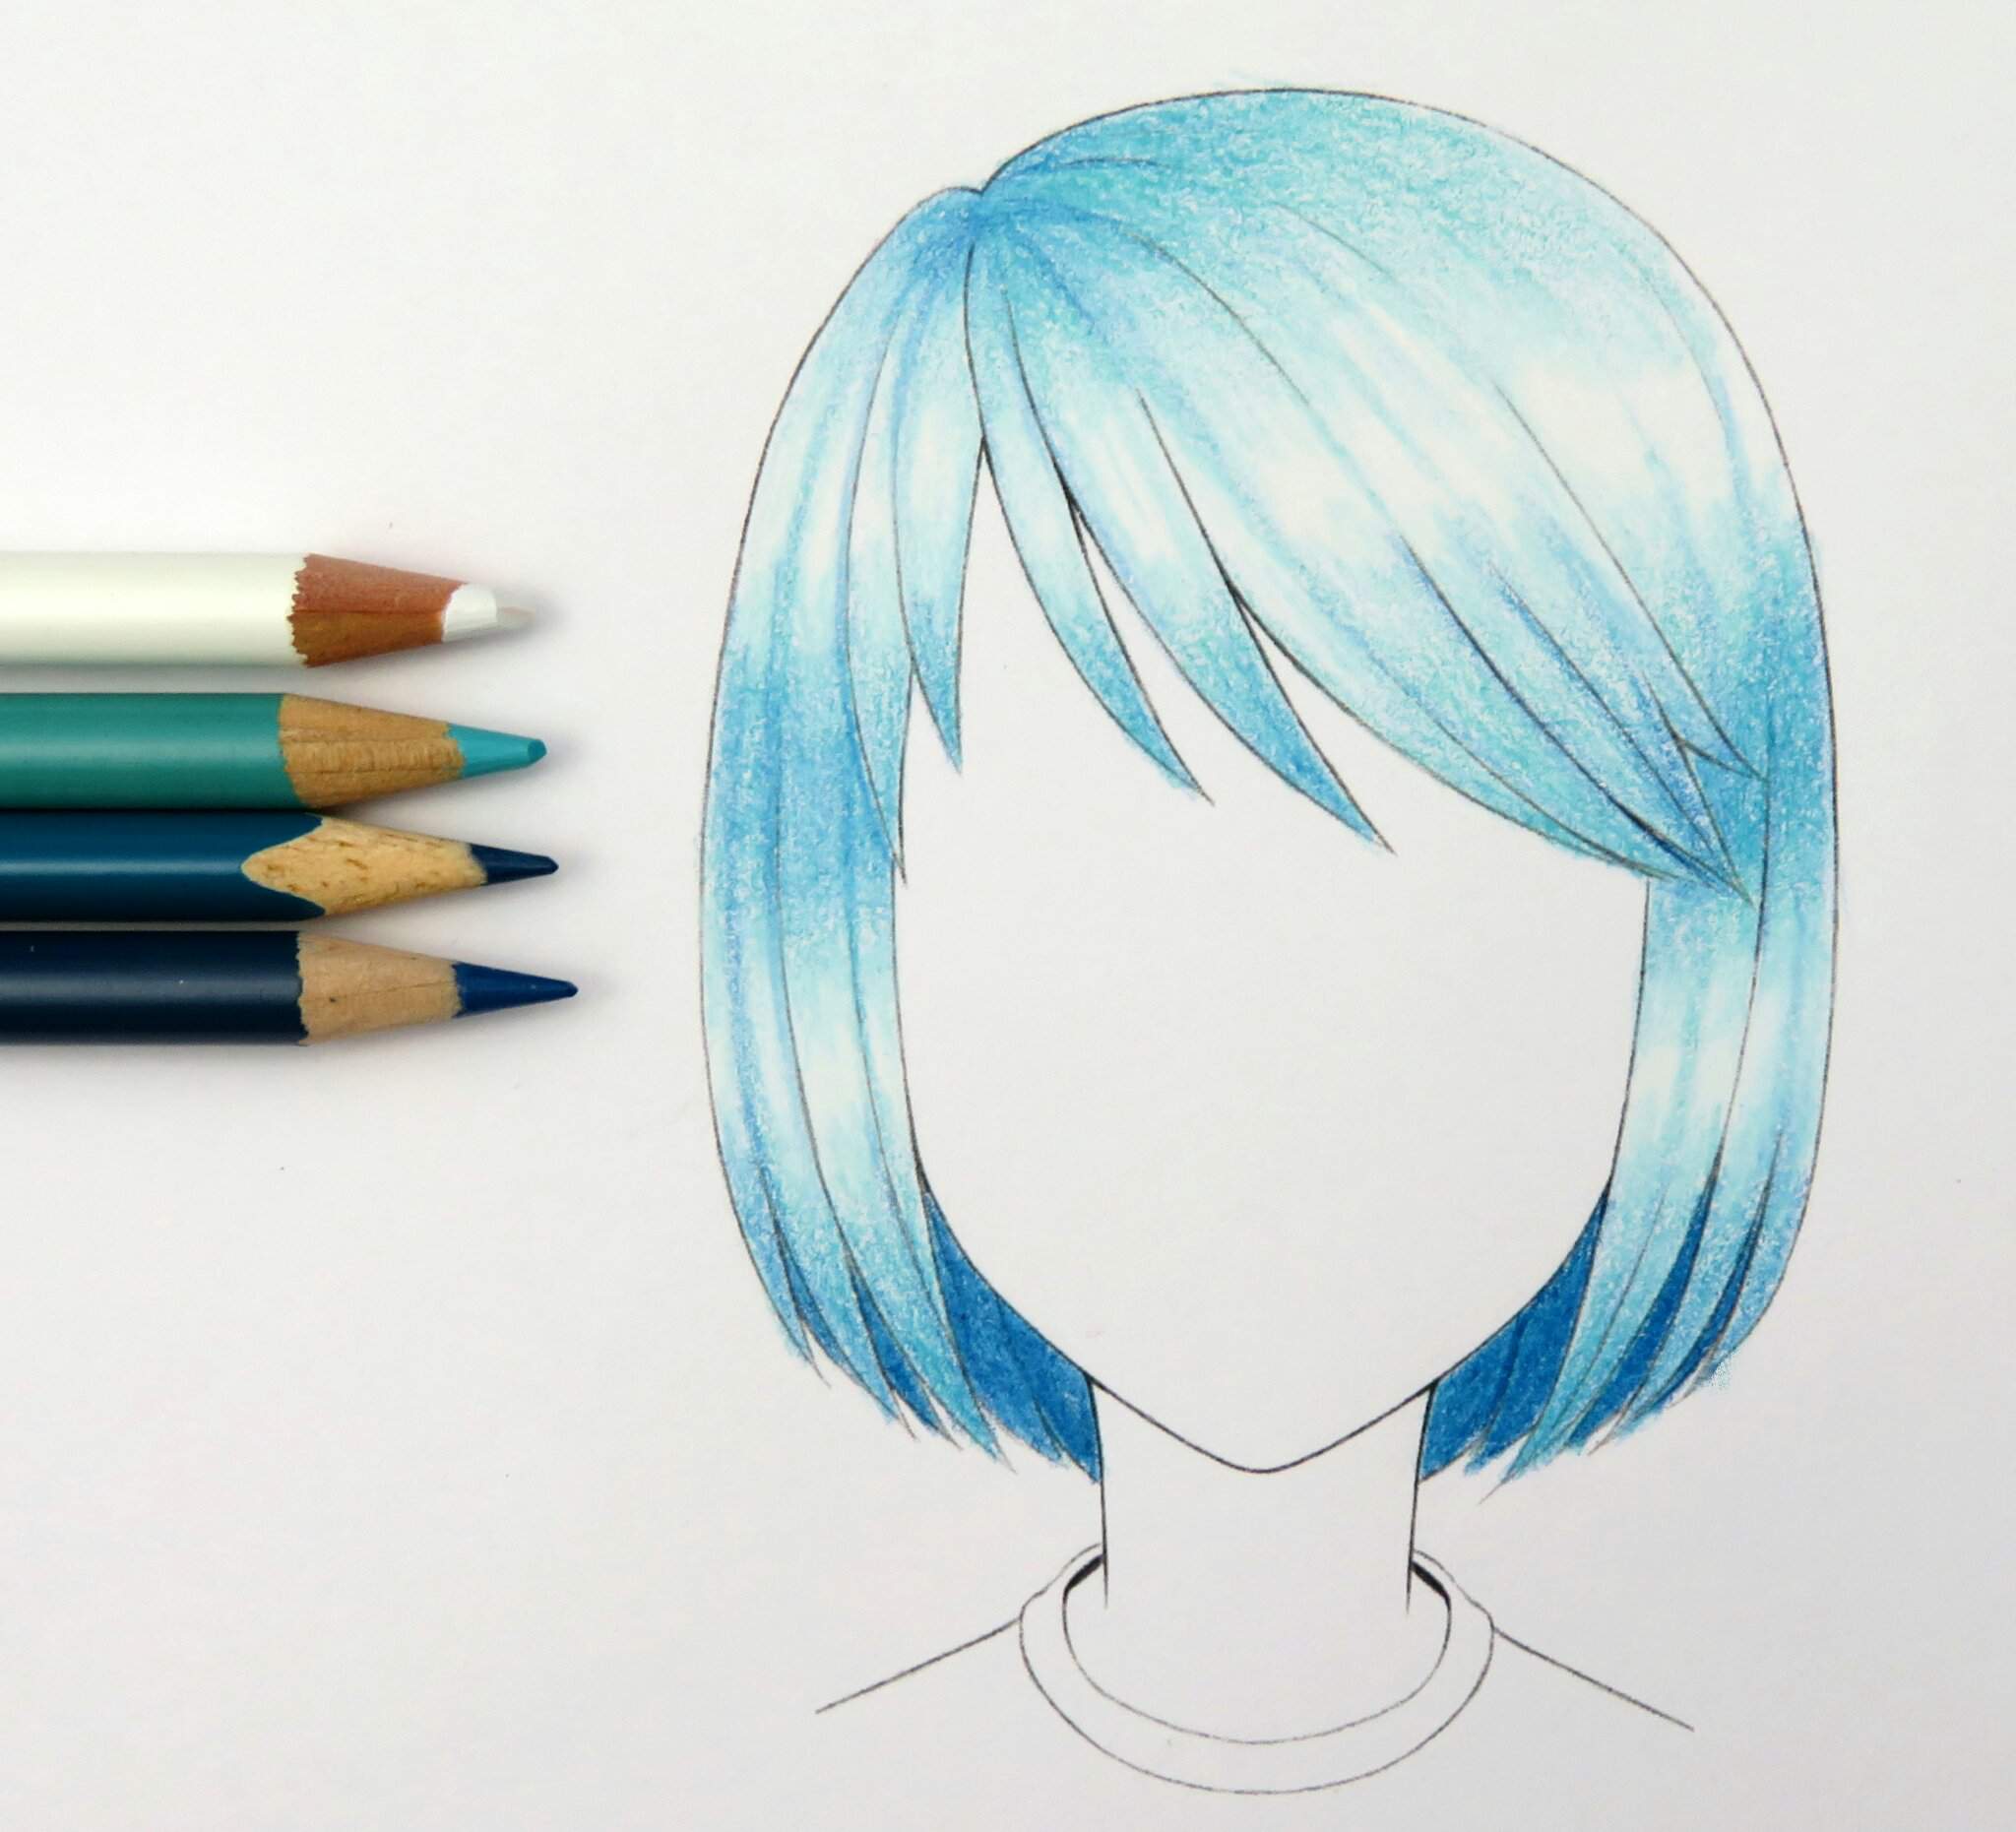 Anime Drawings With Color Pencils Analogous colors are another common